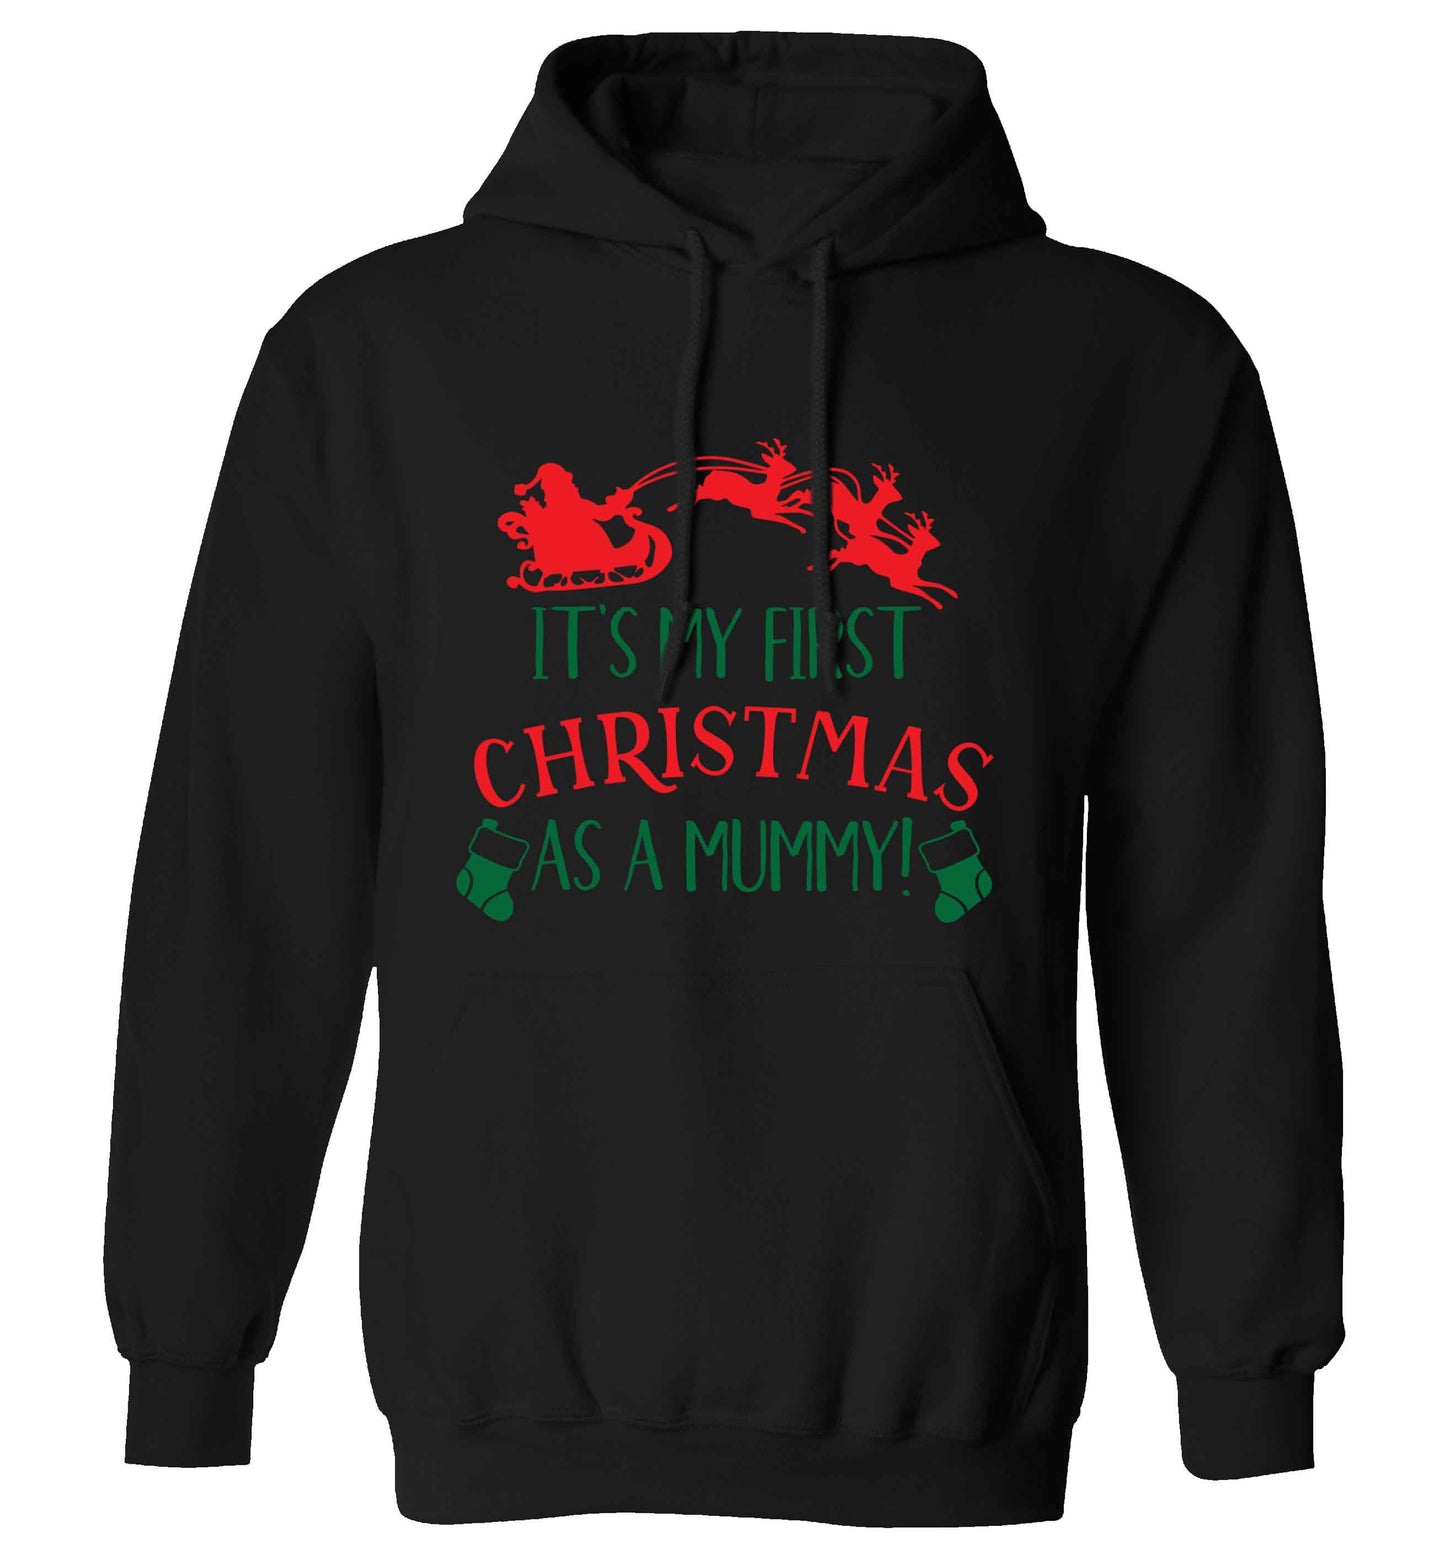 It's my first Christmas as a mummy adults unisex black hoodie 2XL